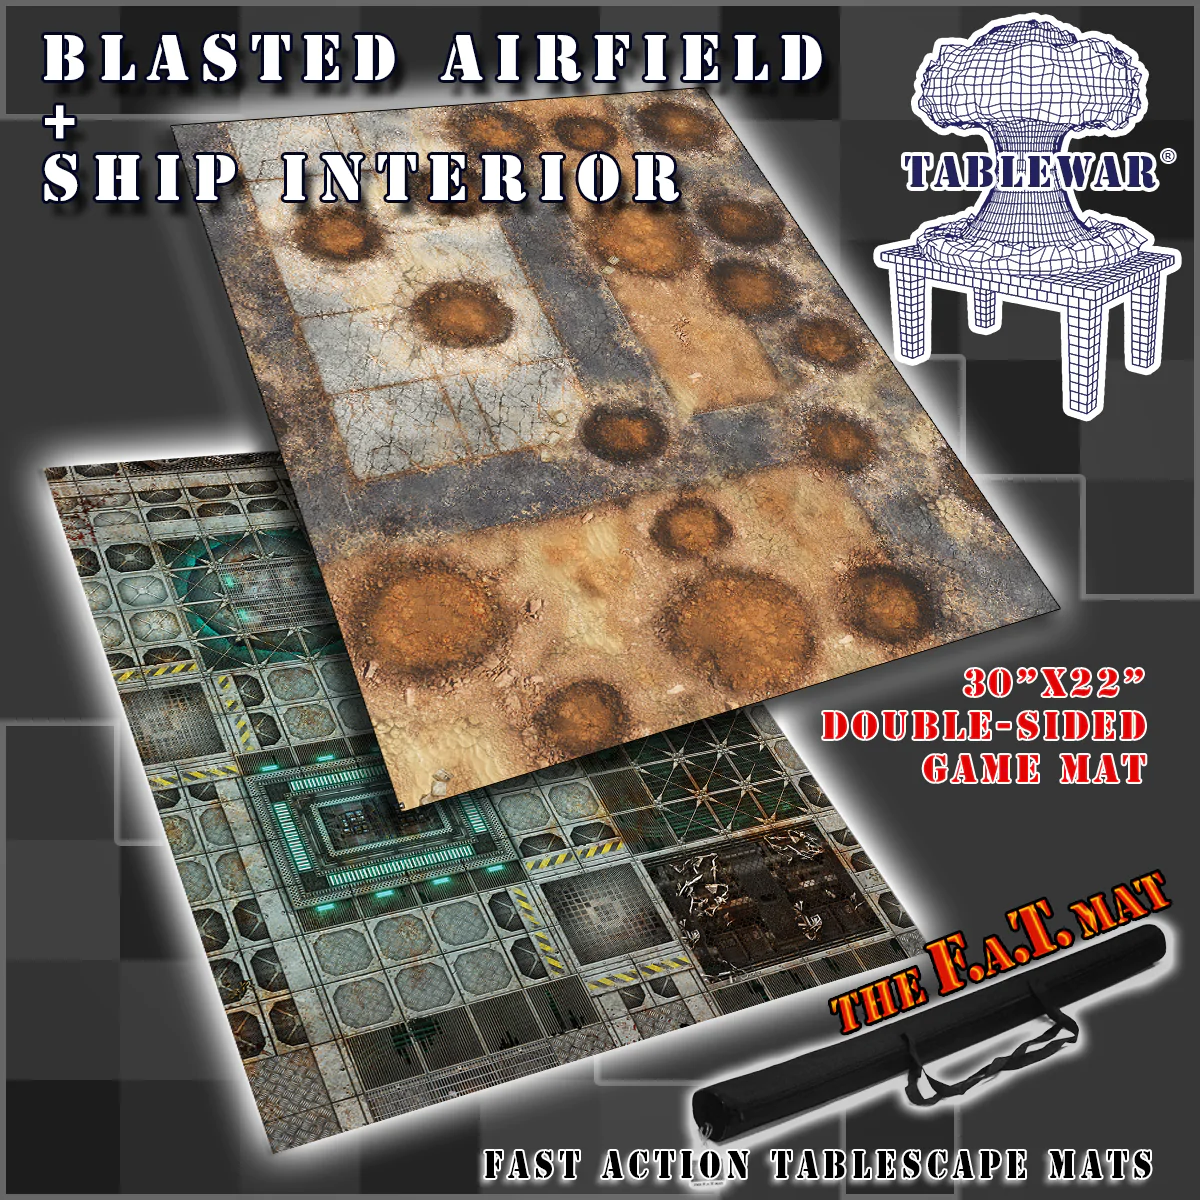 F.A.T. MATS: SHIP INTERIOR/BLASTED AIRFIELD 30